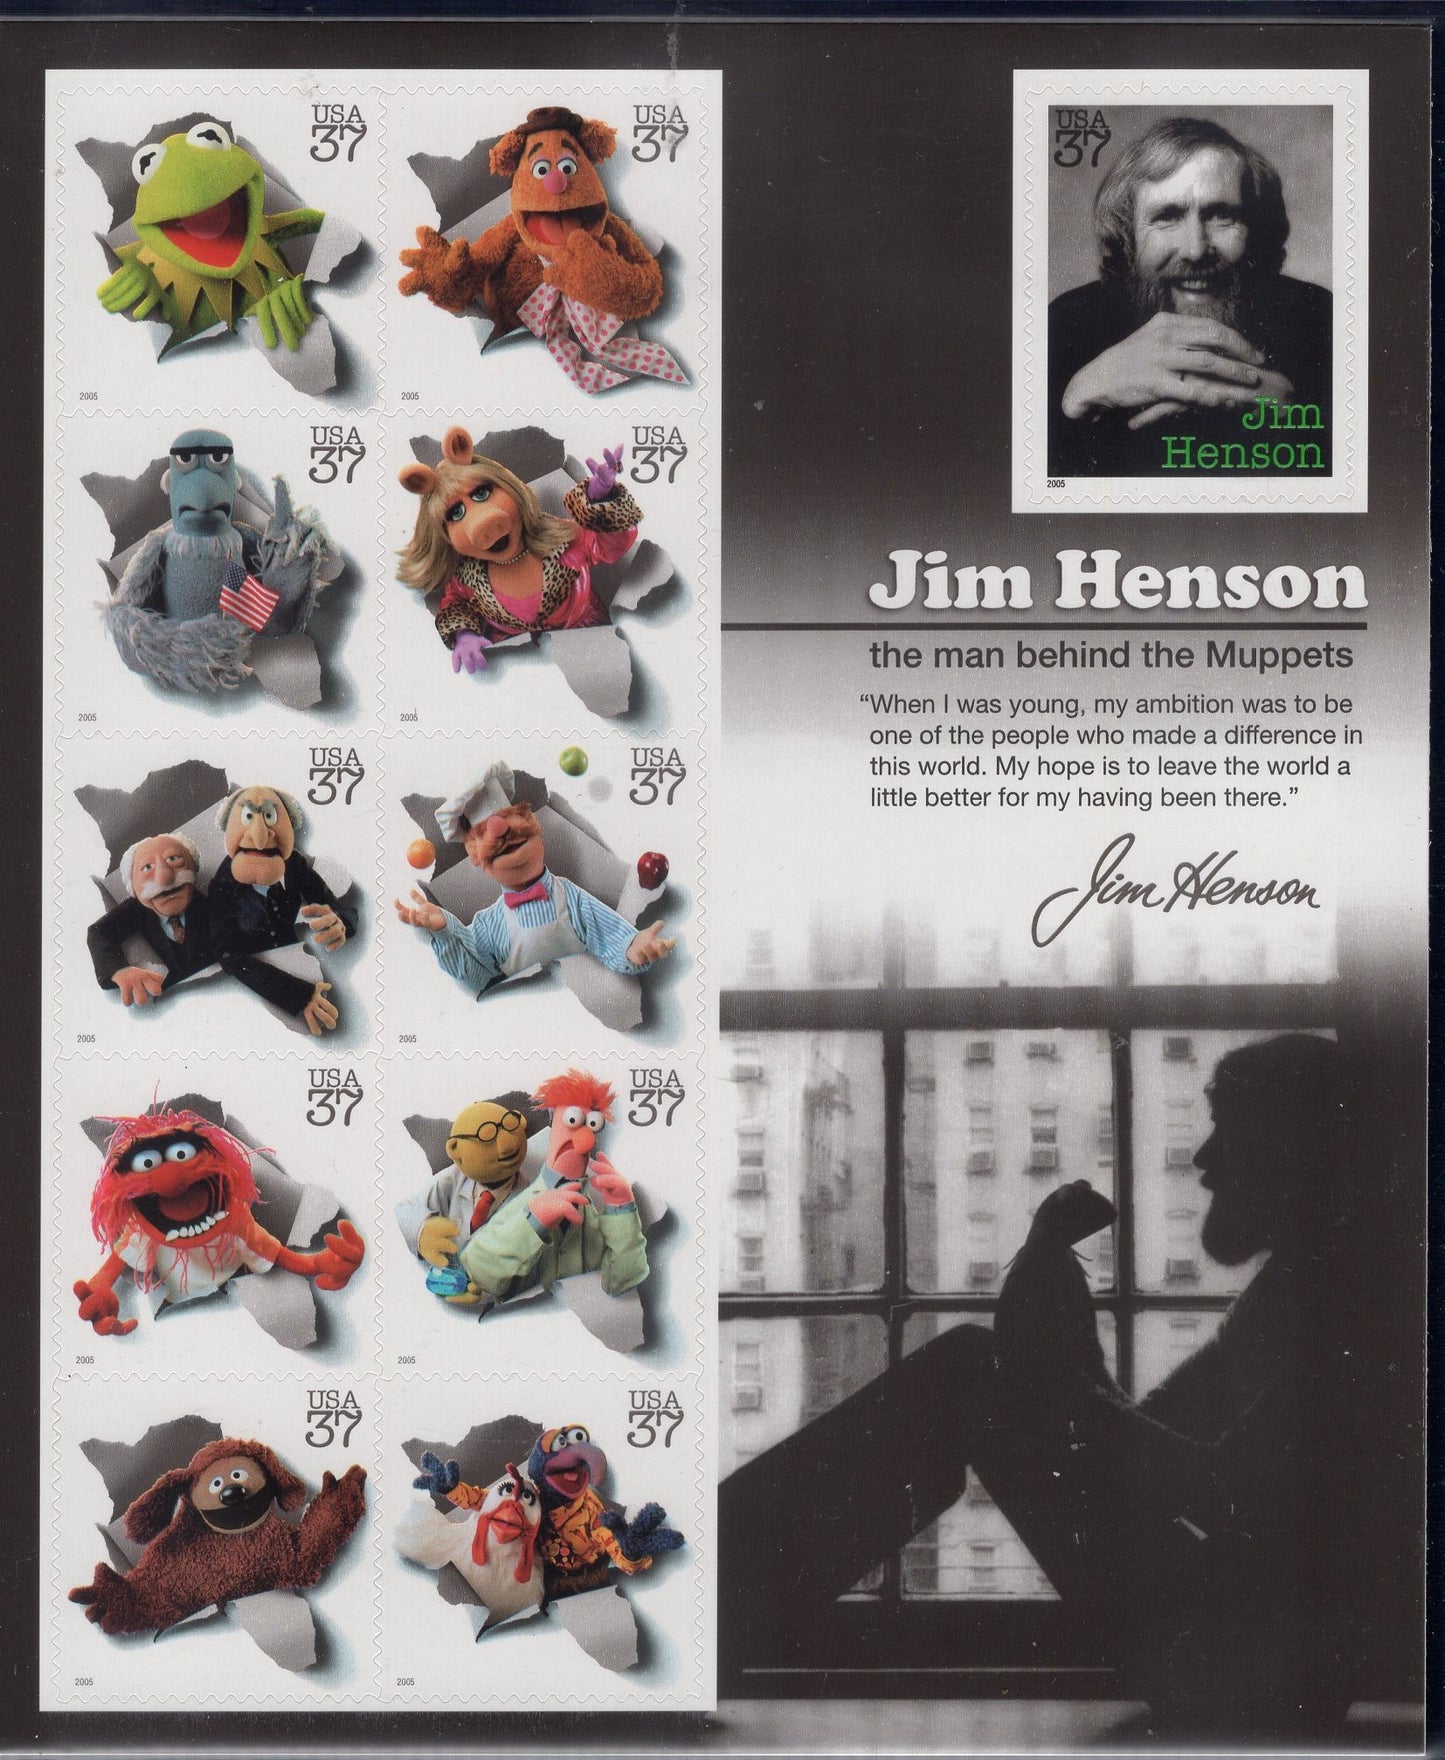 MUPPETS JIM HENSON Sheet of 11 Kermit Miss Piggy Quantity Available 37c Postage Stamps - Bright Fresh Issued in 2005 s3944